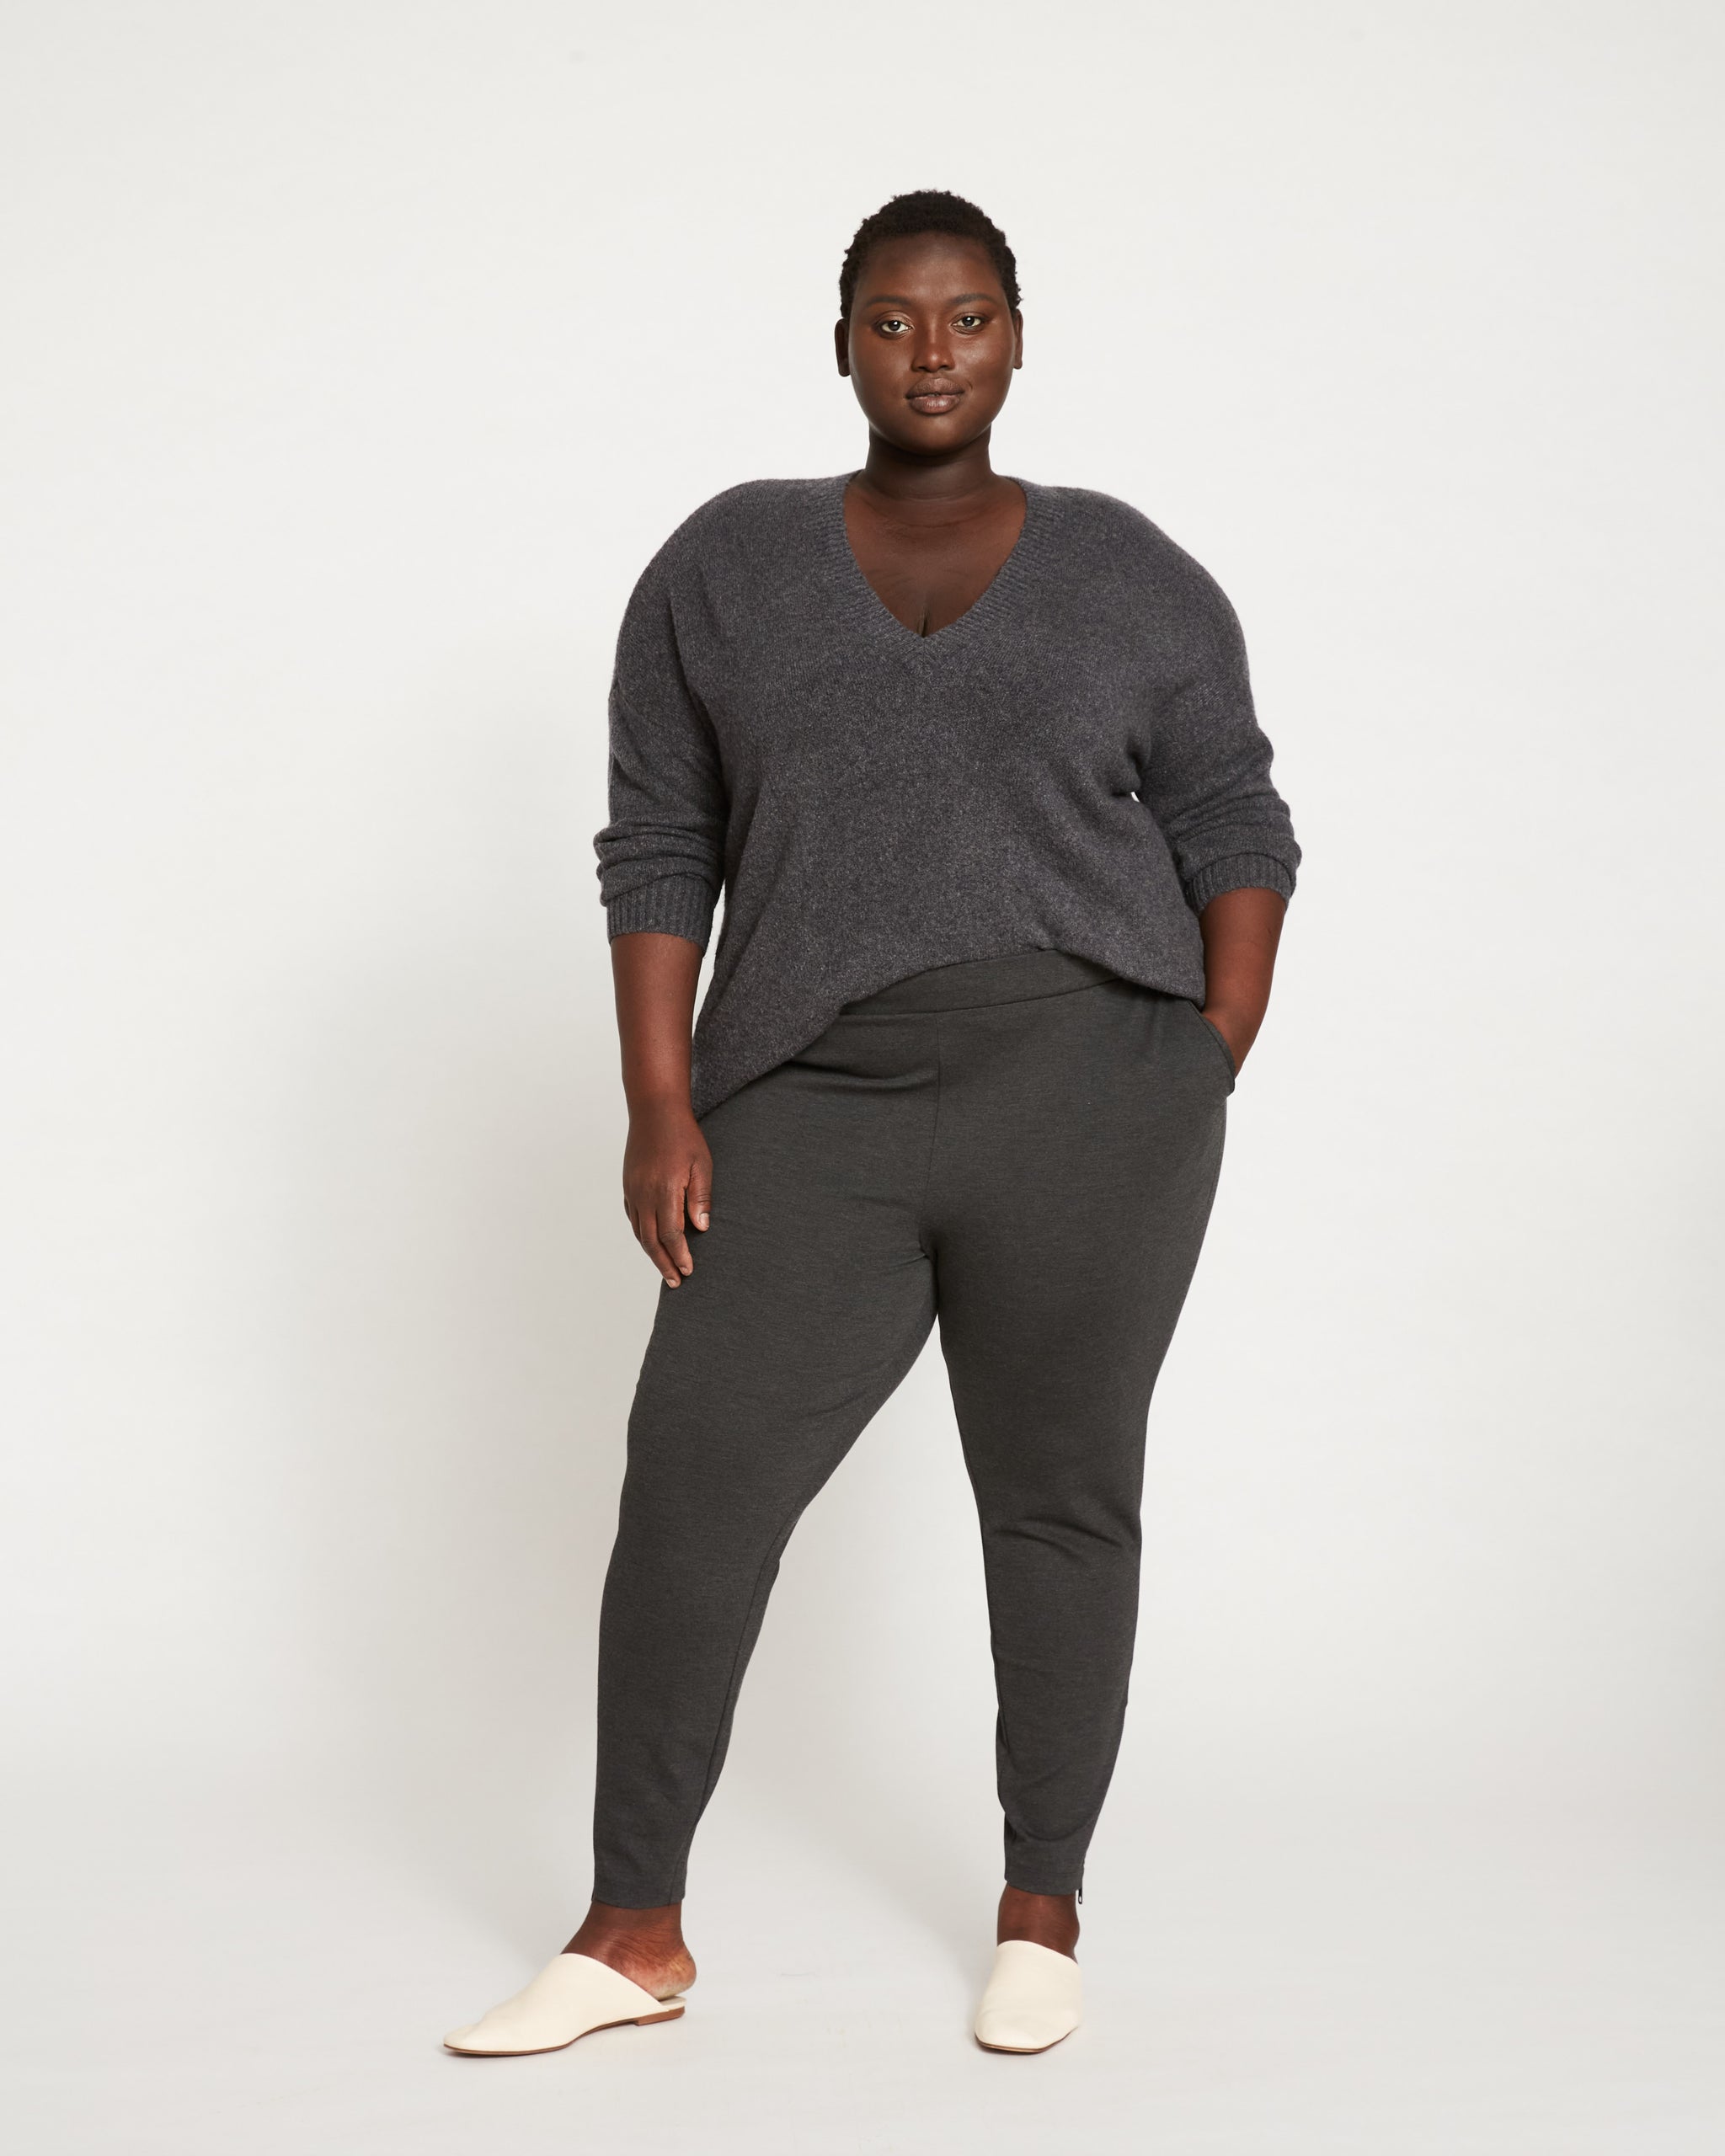 Universal Standard Moro Pocket Signature Ponte Pants on Sale for $39 Today  : r/FrugalFemaleFashion